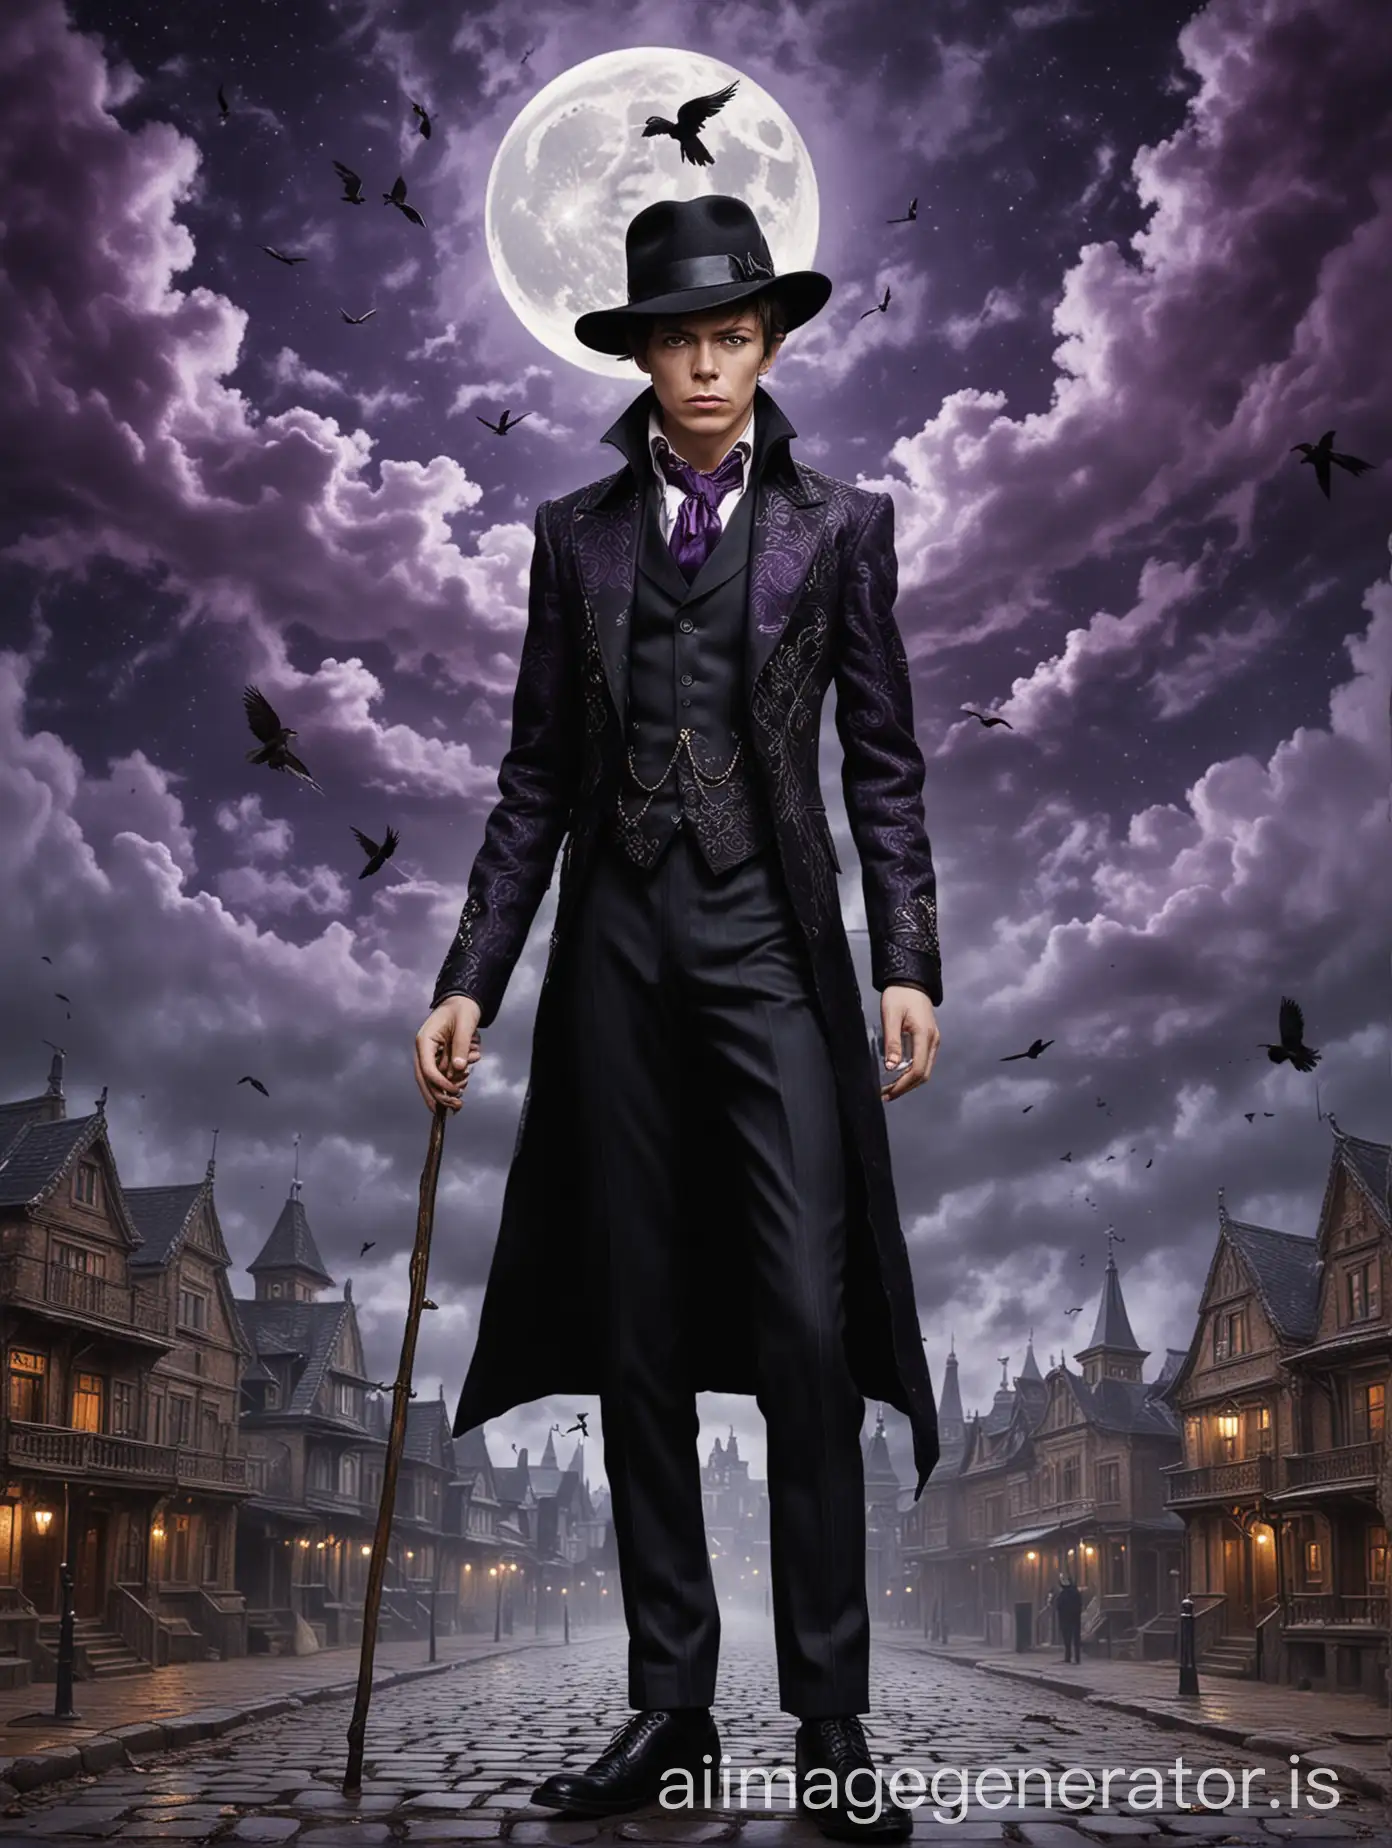 david bowie face in his teens, black hair, disgust face expression, wearing black fedora hat, juvenile face,  slender young man with a black hair, man holding a gentleman's cane with a silver-crow-head-shaped handle, man wearing black three-piece black suit in intricate paisley pattern with a purple vest, midnight background with a stormy clouds, crescent-shape moon, six crows flying in the sky, old city background, wooden buildings, wet stone bricks